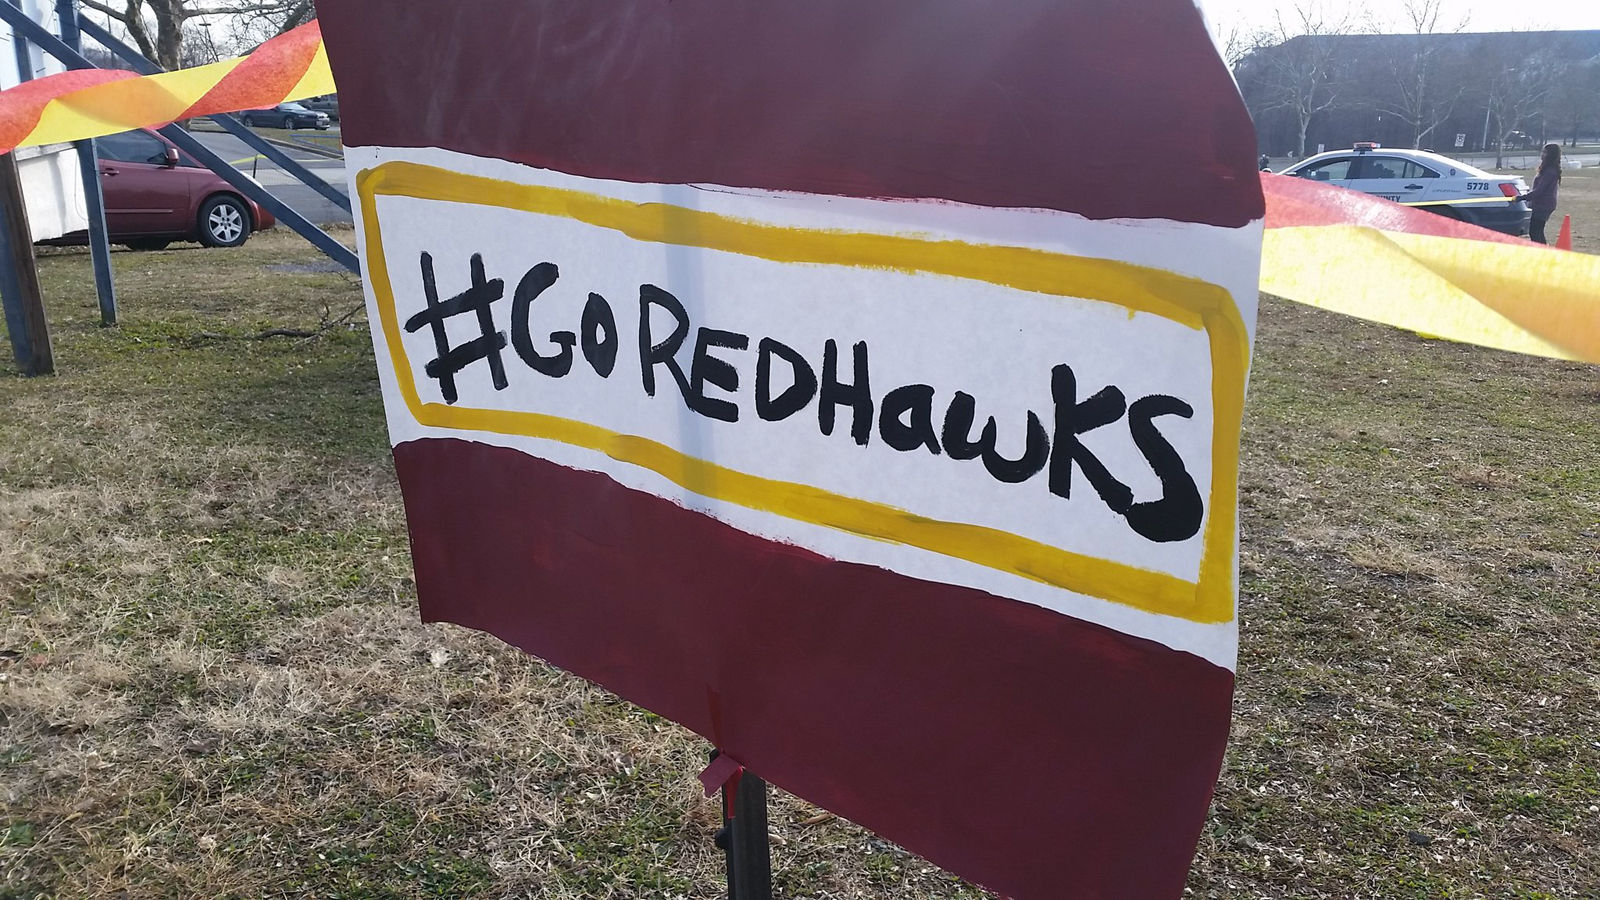 Native-American activists rallying outside the FedEx field in Landover, Maryland, on Sunday have reignited the debate over changing the Washington Redskins football team name. They want the name to be changed to the Redhawks. (WTOP/Kathy Stewart)